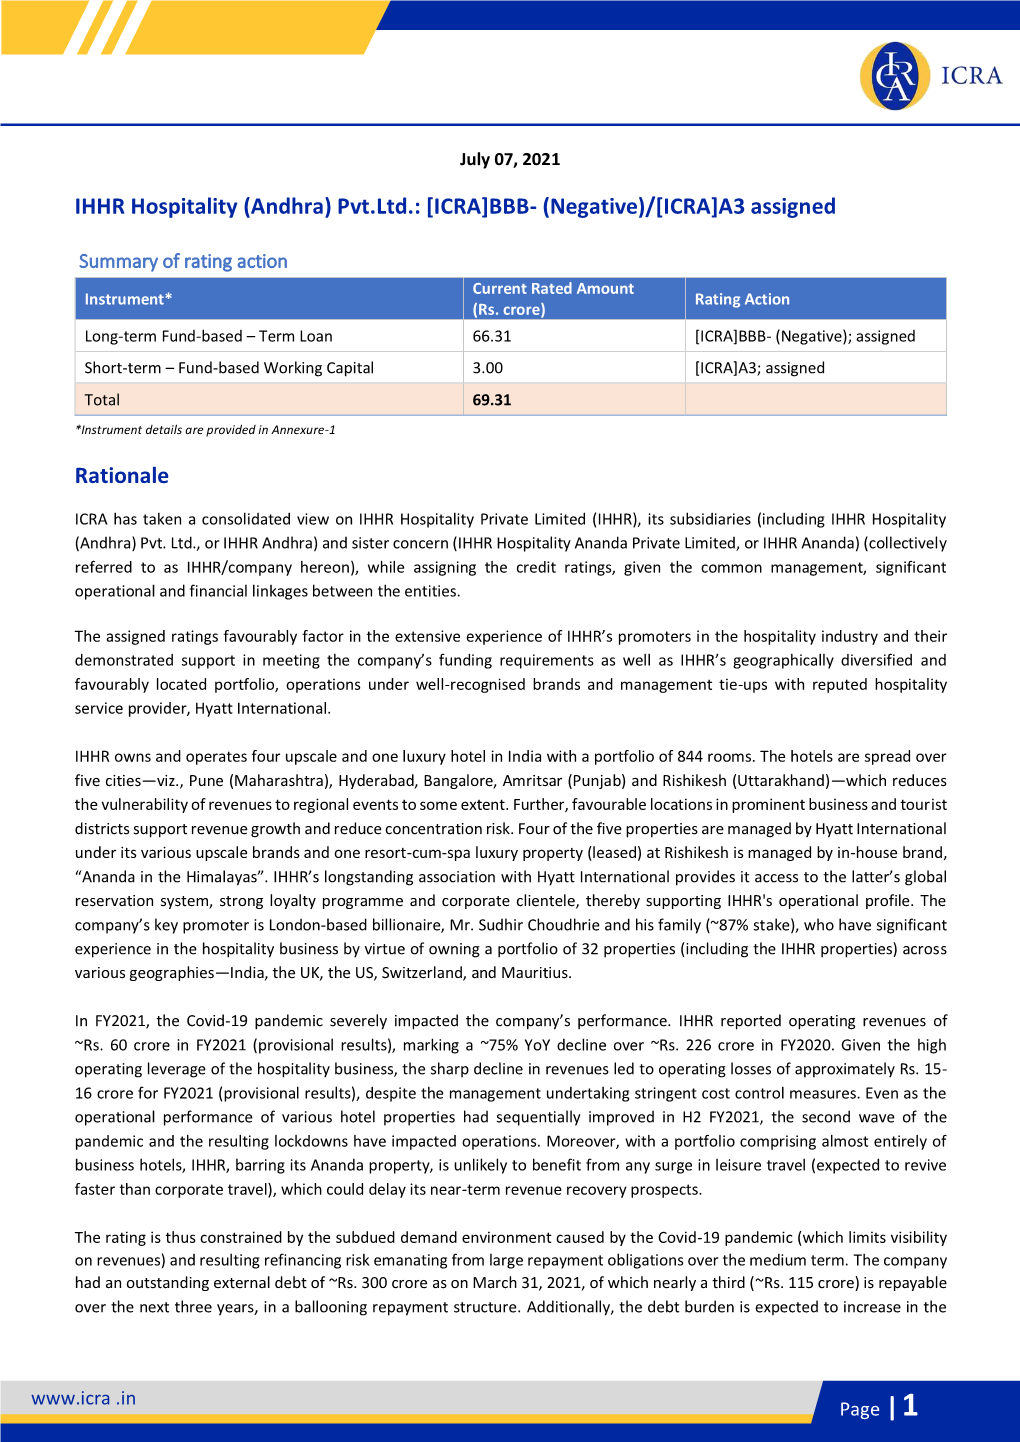 IHHR Hospitality (Andhra) Pvt.Ltd.: [ICRA]BBB- (Negative)/[ICRA]A3 Assigned